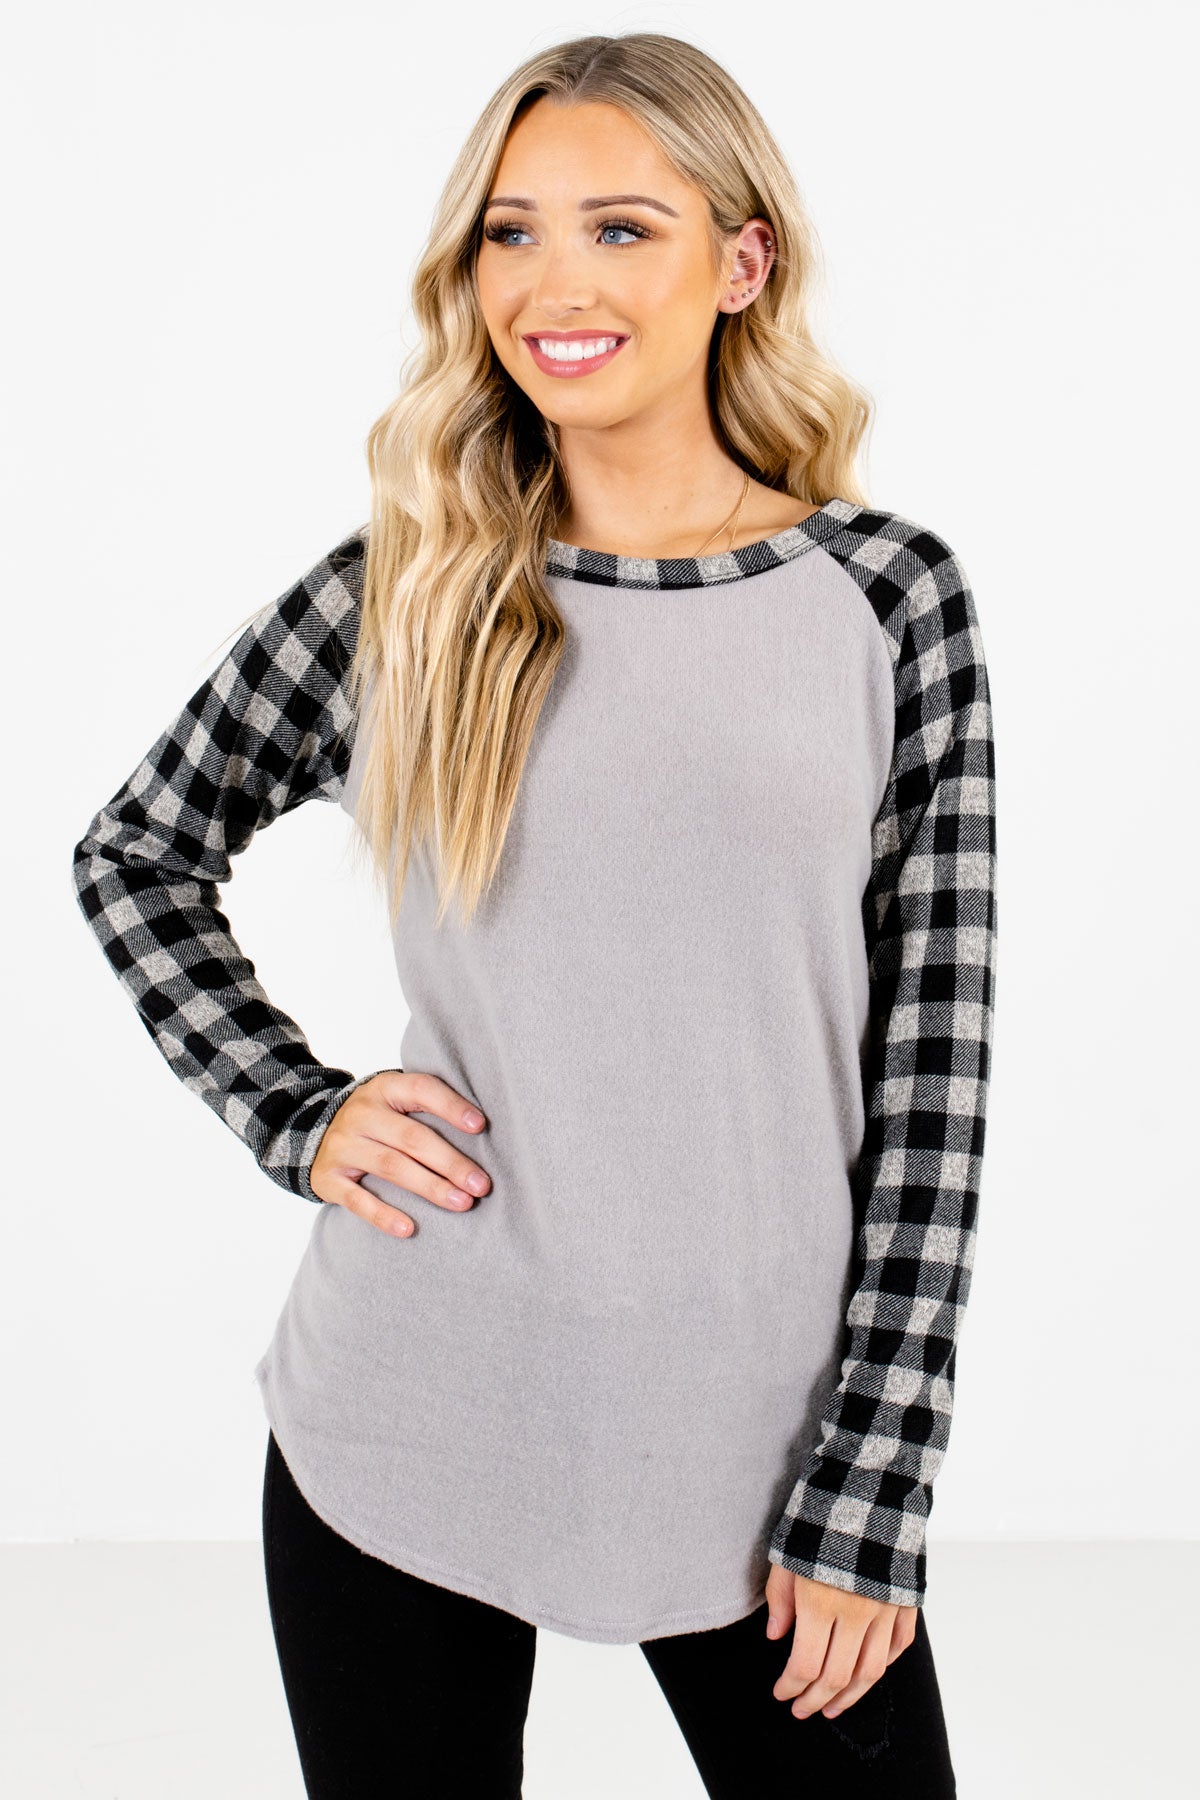 Gray Boutique Tops with Plaid Patterned Sleeve for Women